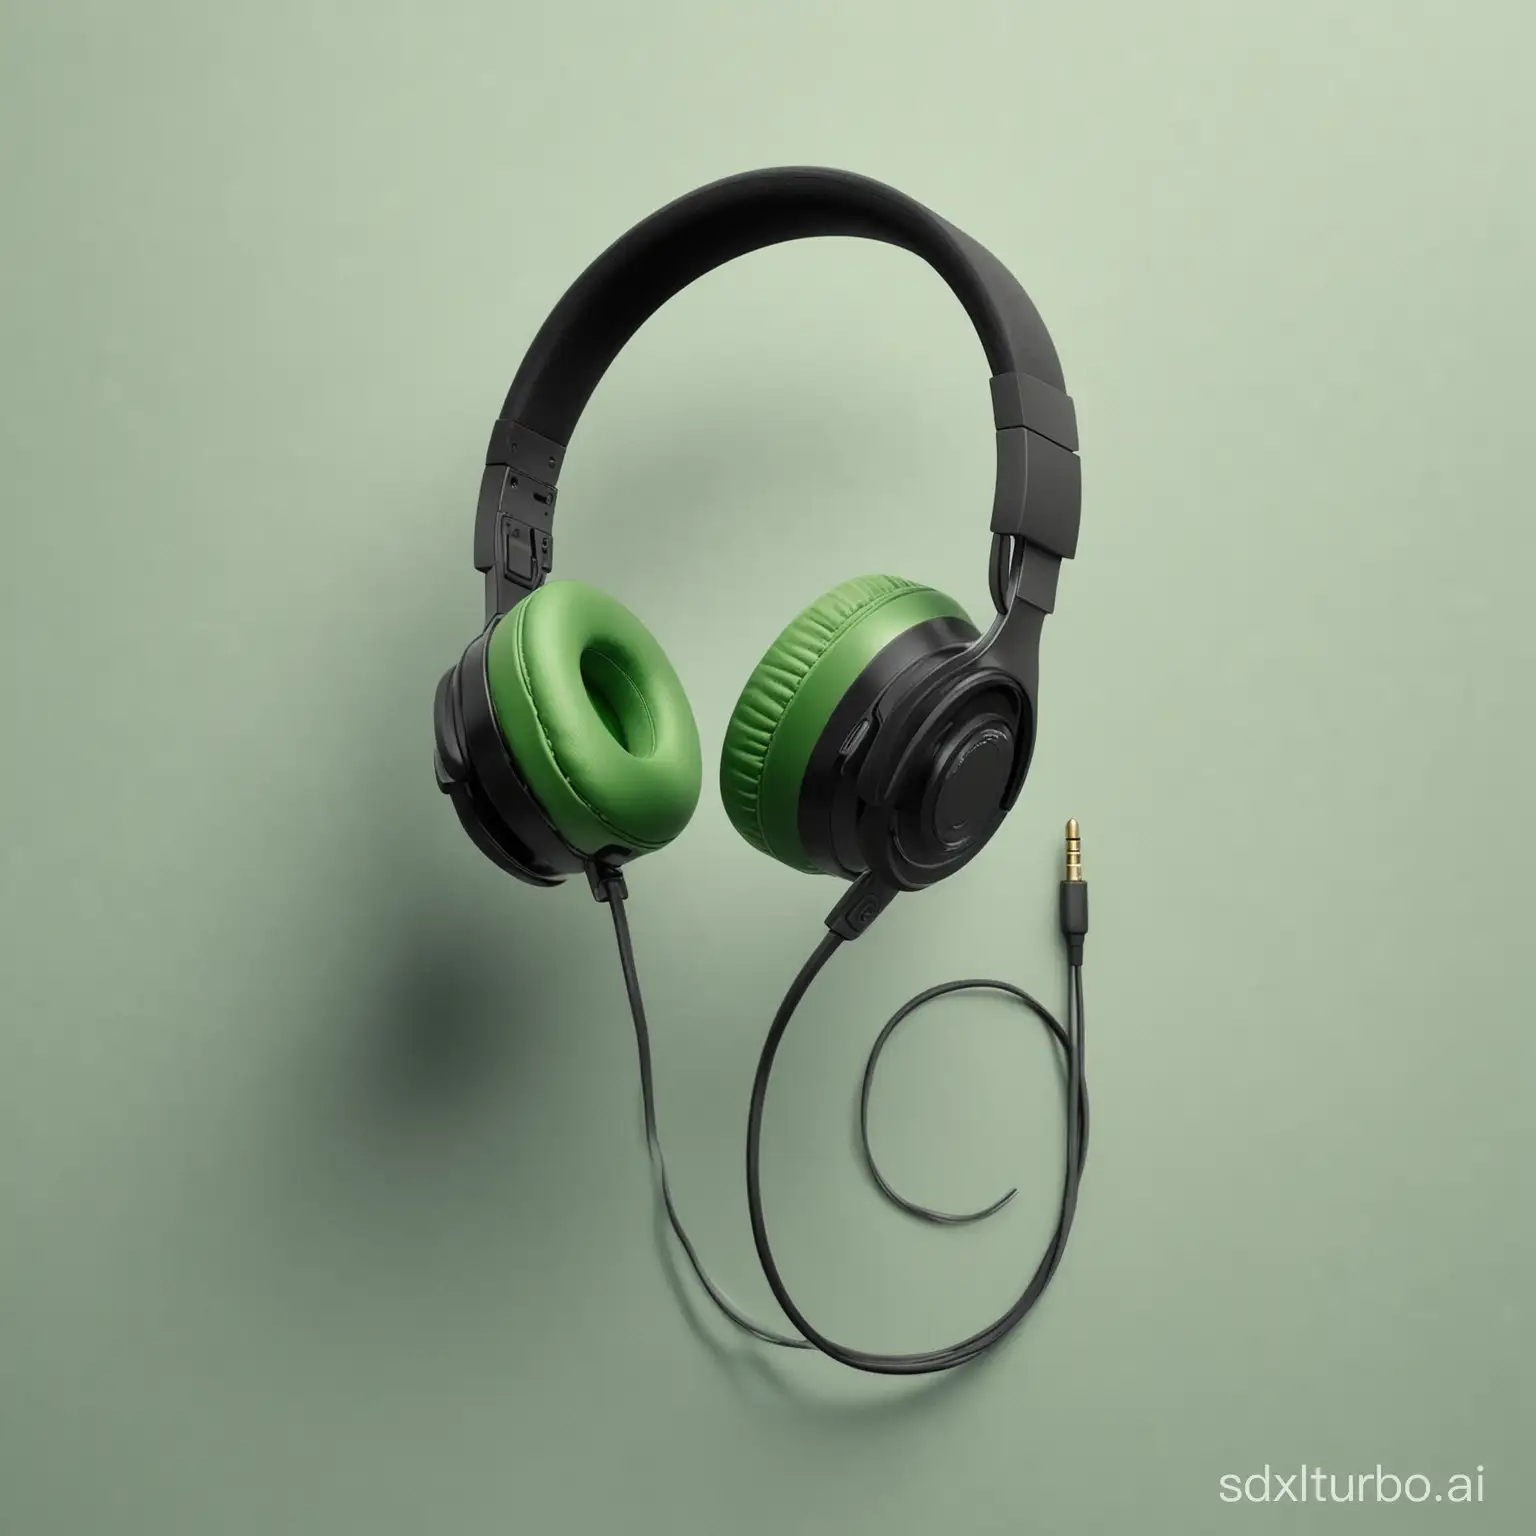 Modern-Green-and-Black-Headphones-for-UXUI-Dribbble-Application